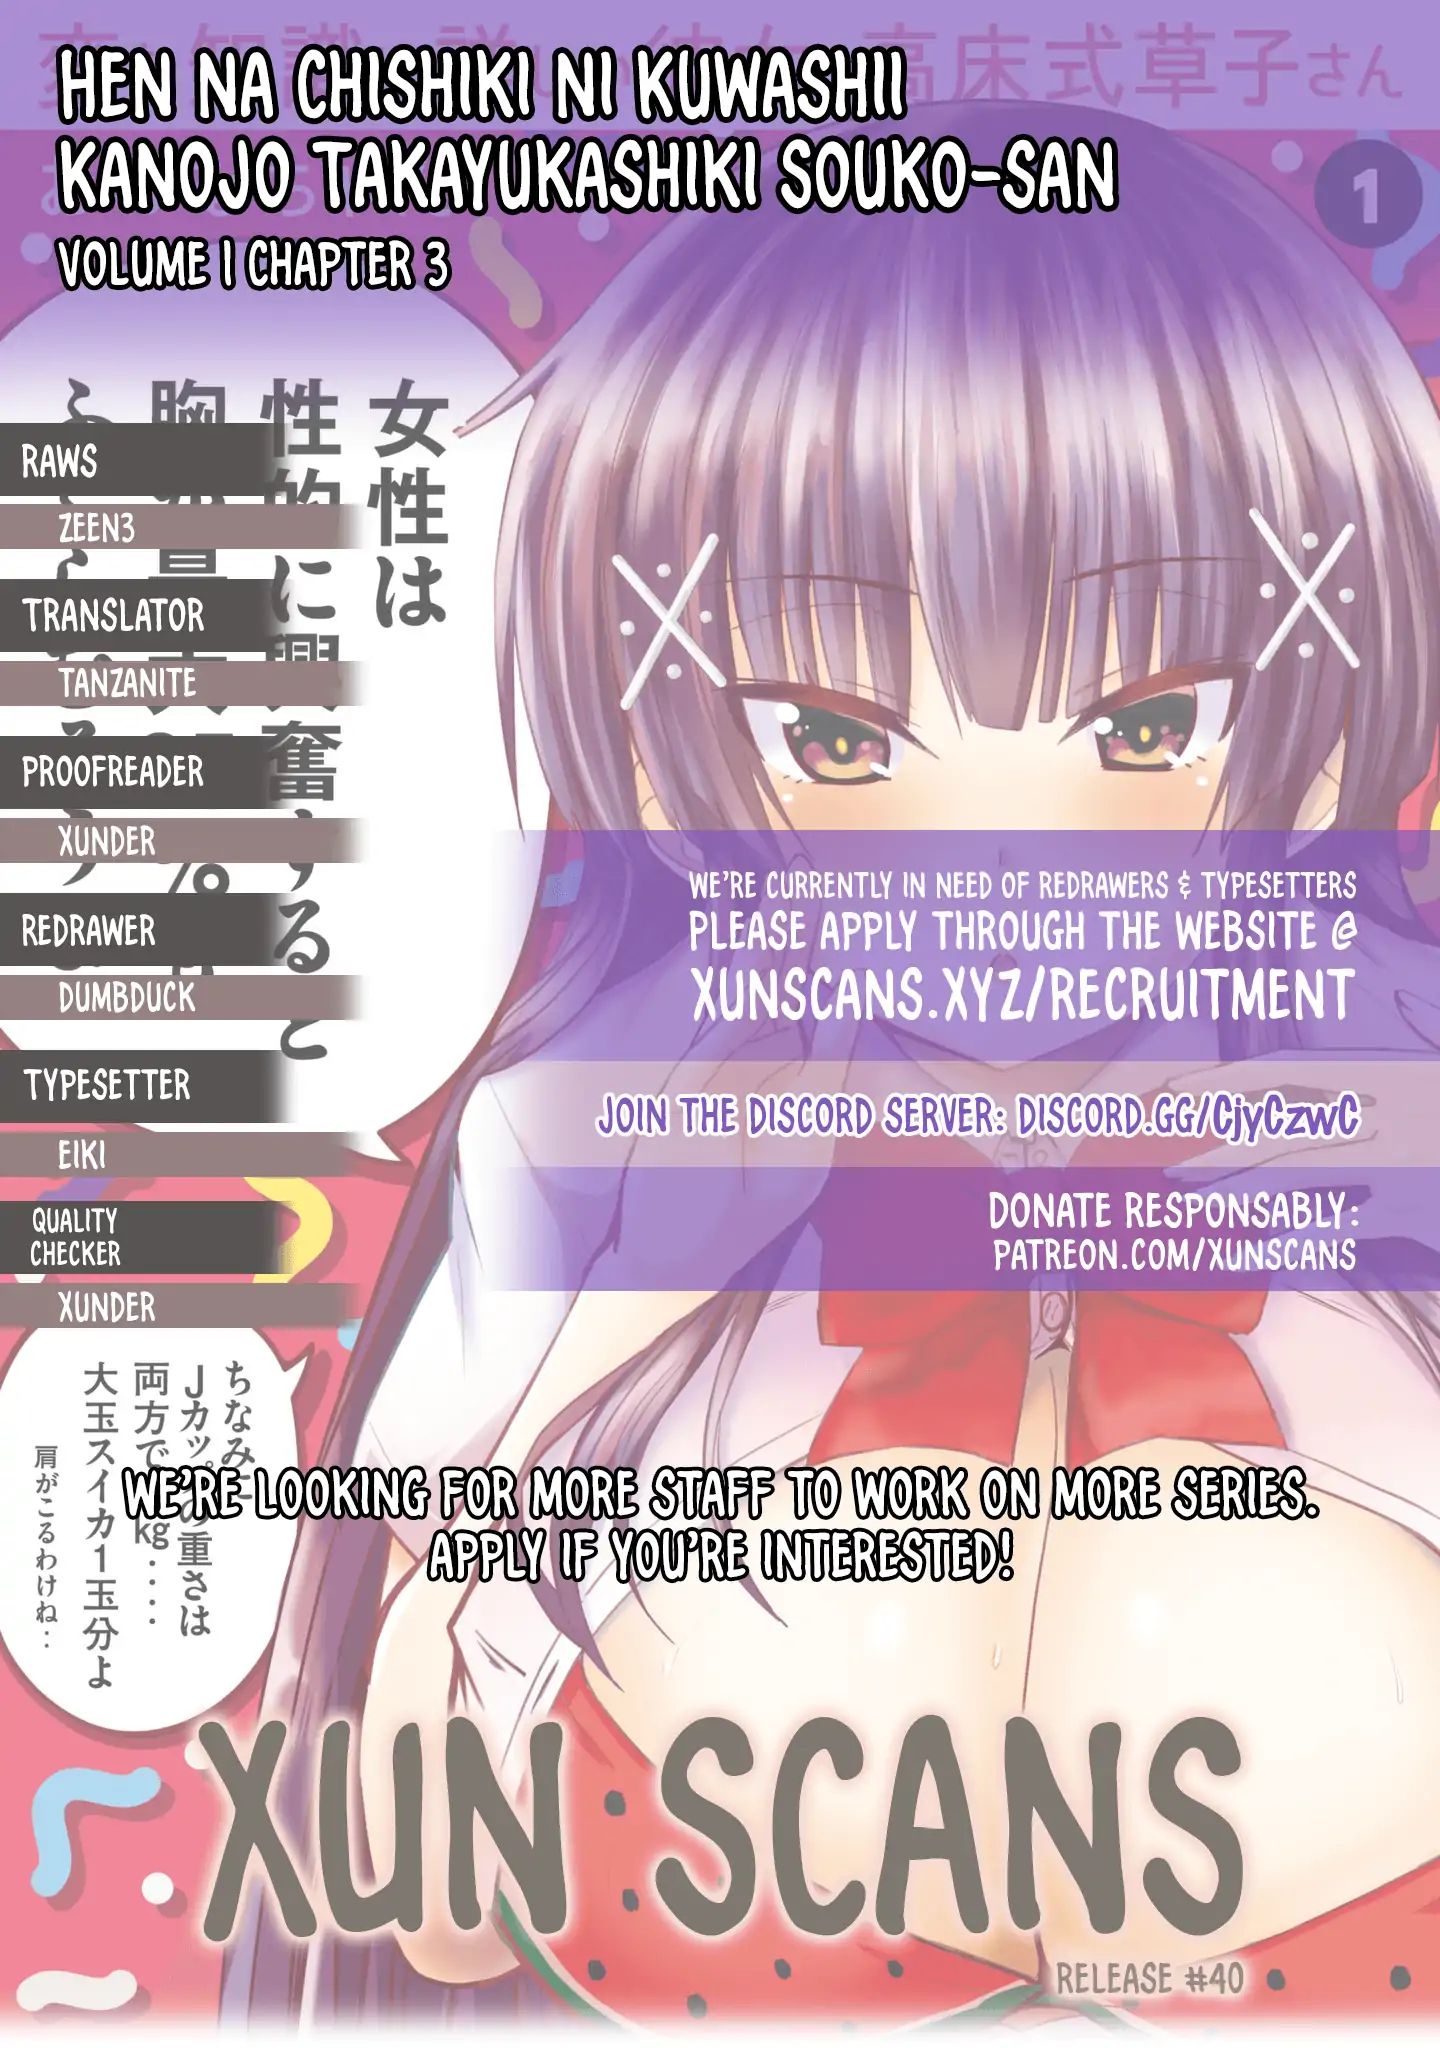 A Girl Who Is Very Well-Informed About Weird Knowledge, Takayukashiki Souko-San Chapter 3 #1